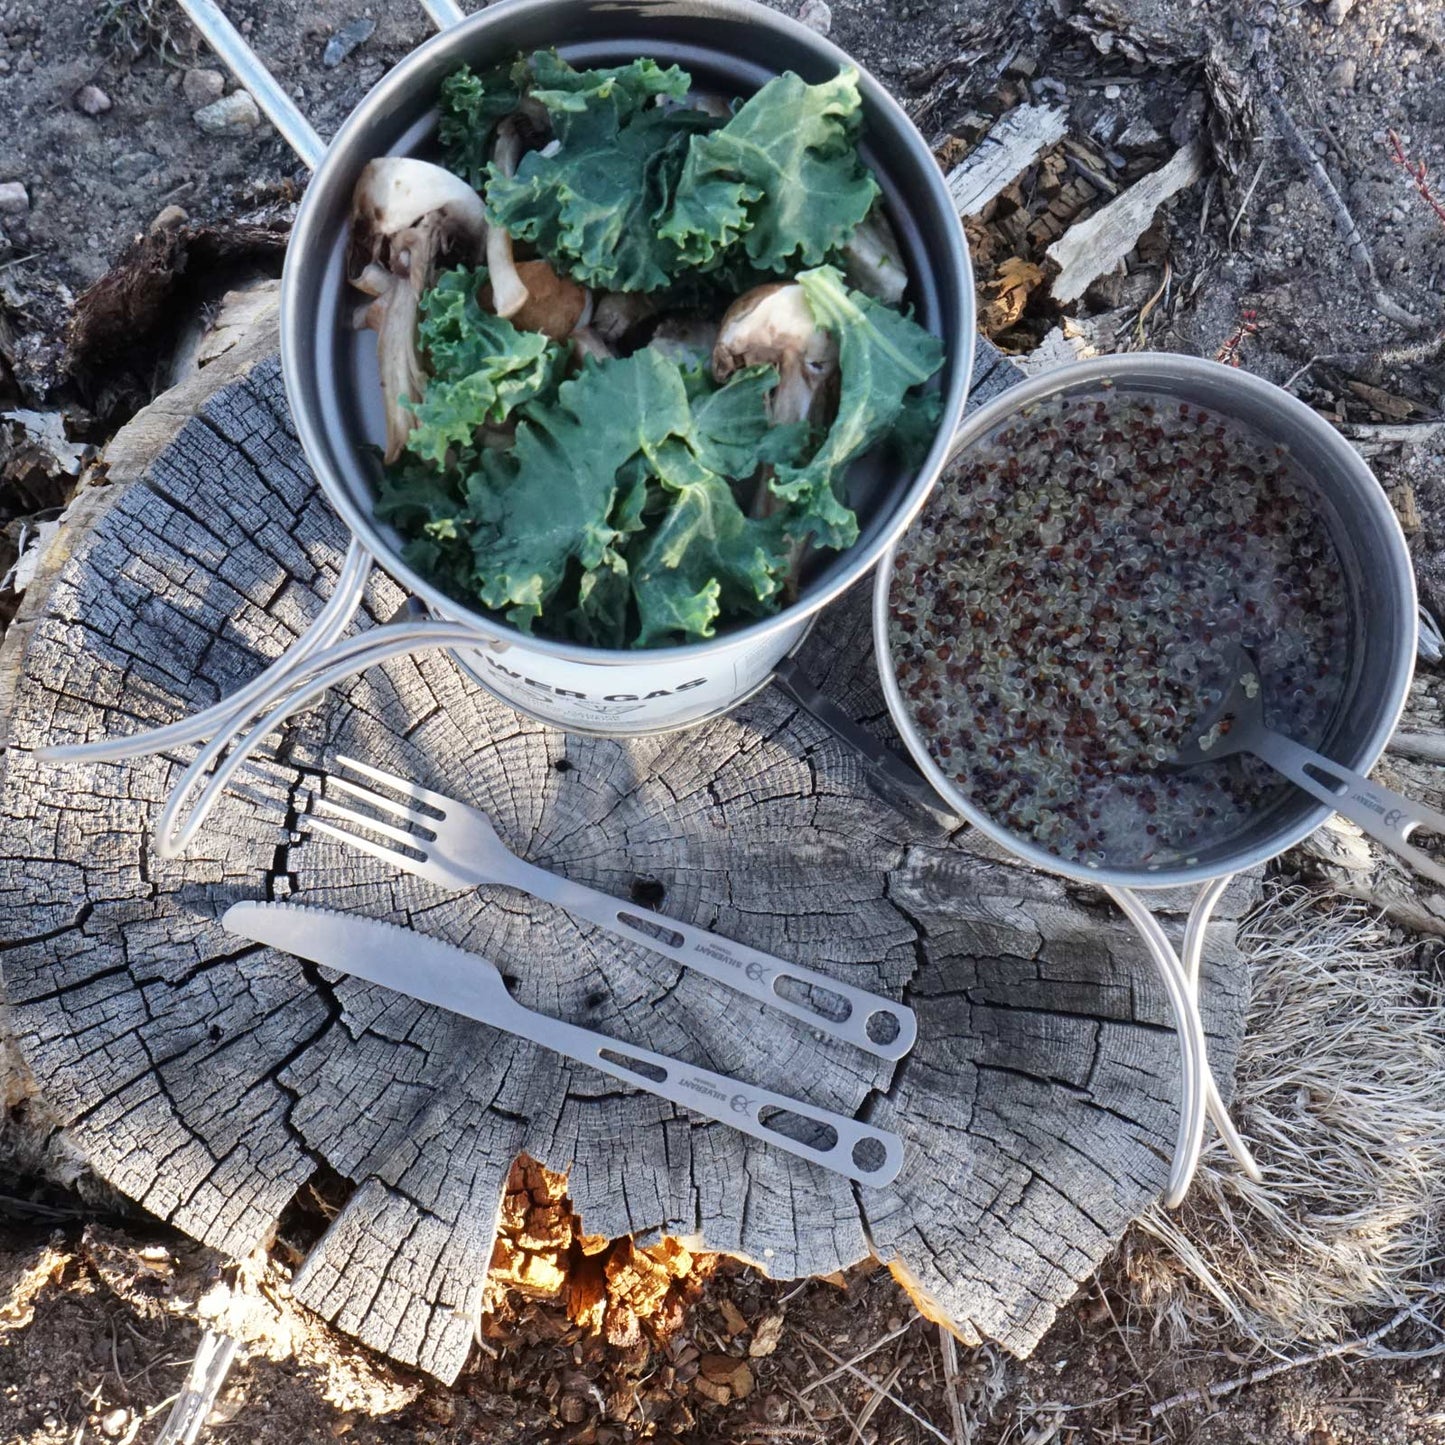 SilverAnt Outdoors Titanium Pots Cooking on a Log